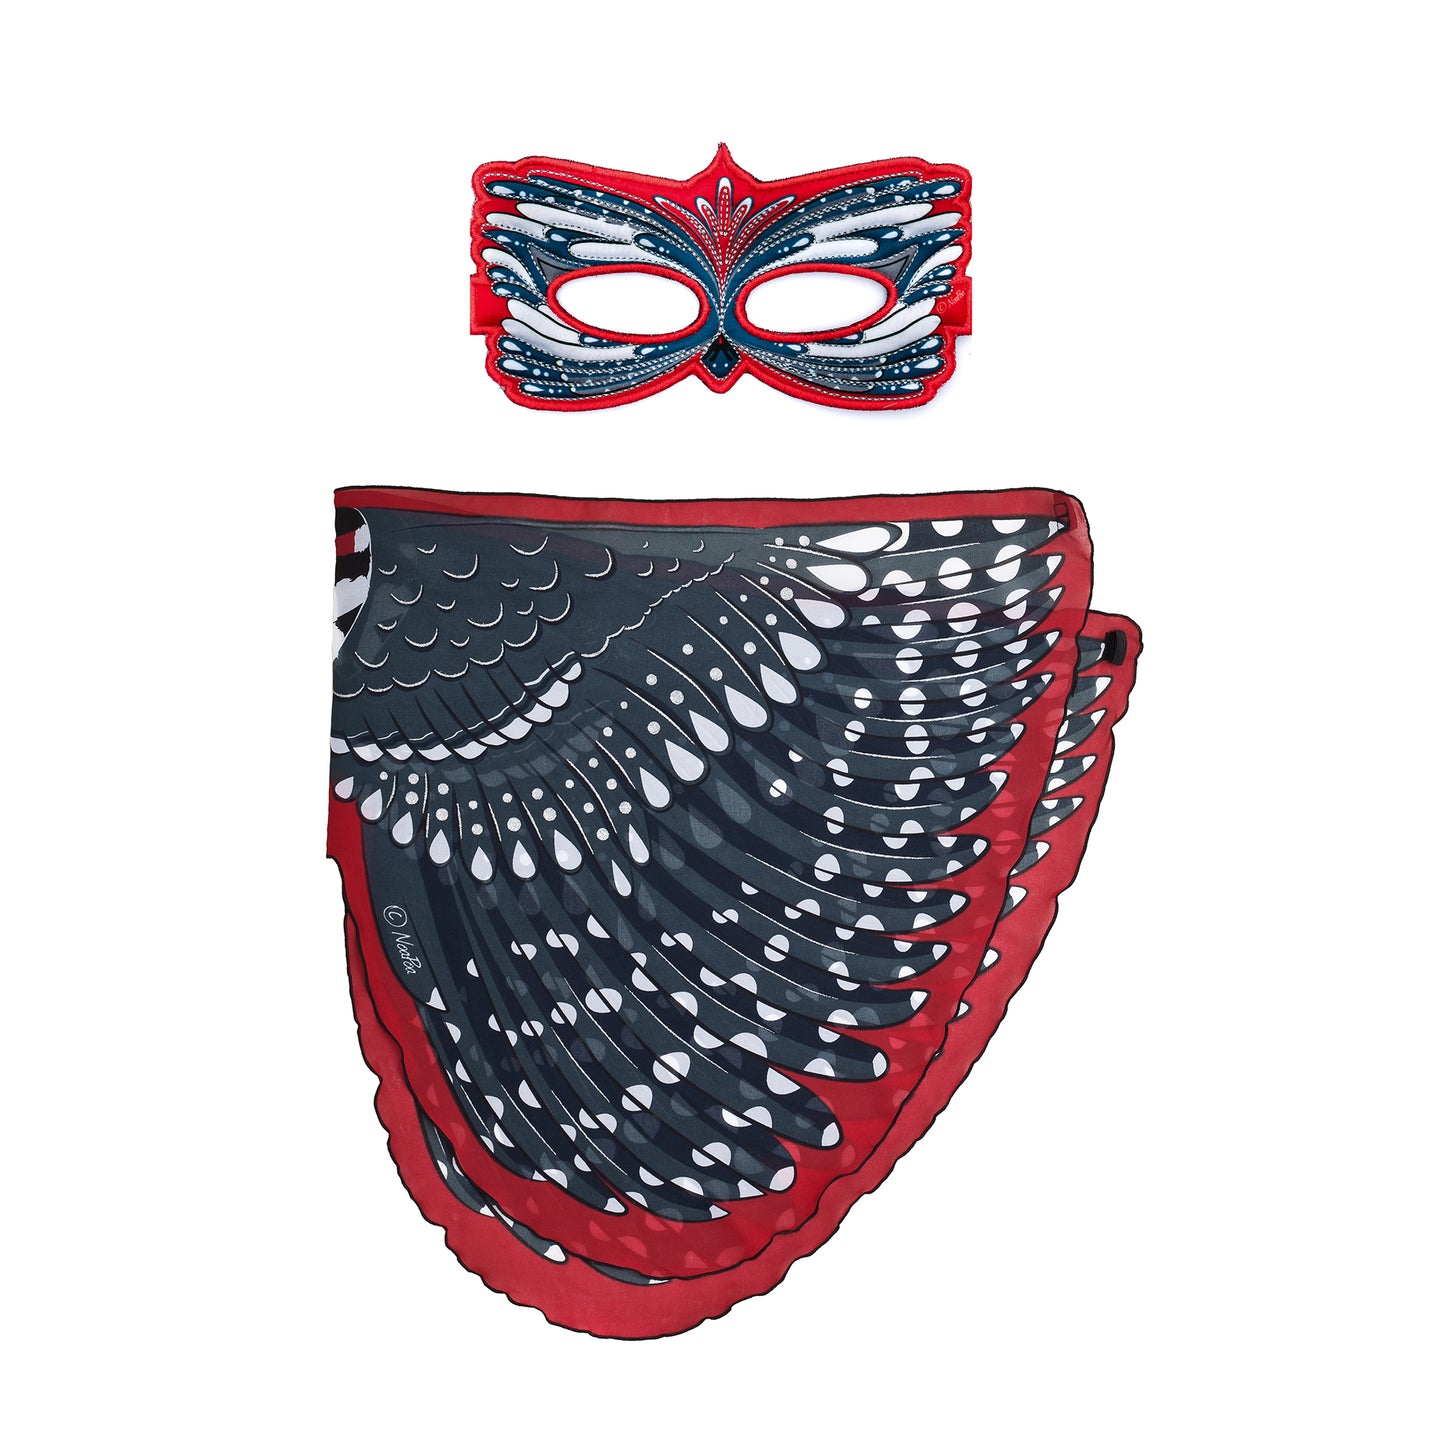 AMERICAN BIRD WINGS + MASK in eco-friendly cotton gift bag